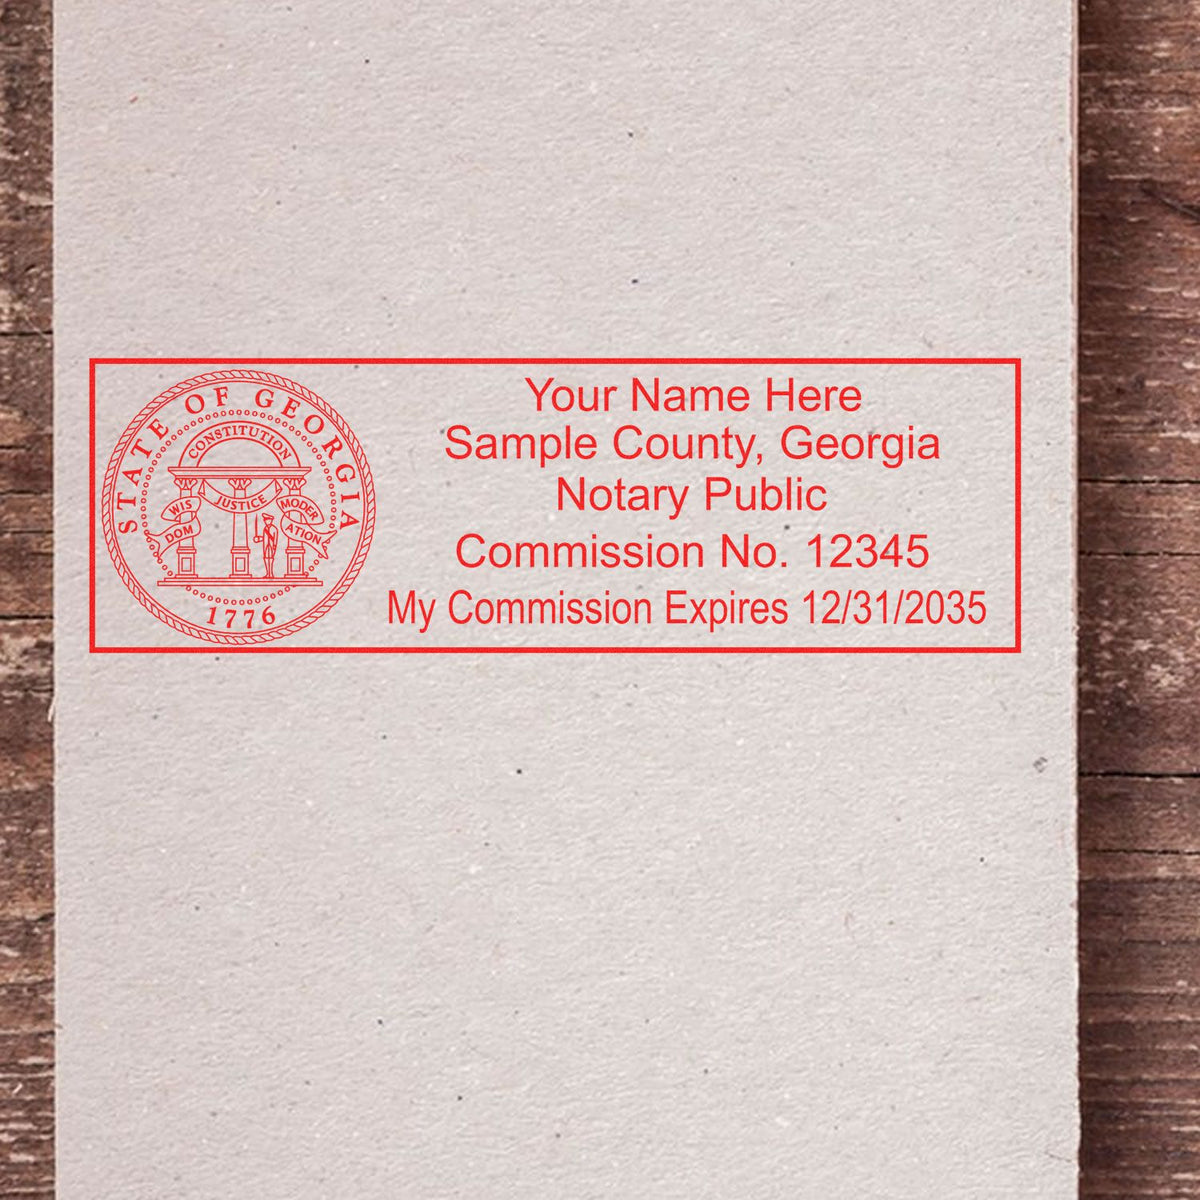 The Self-Inking Rectangular Georgia Notary Stamp stamp impression comes to life with a crisp, detailed photo on paper - showcasing true professional quality.